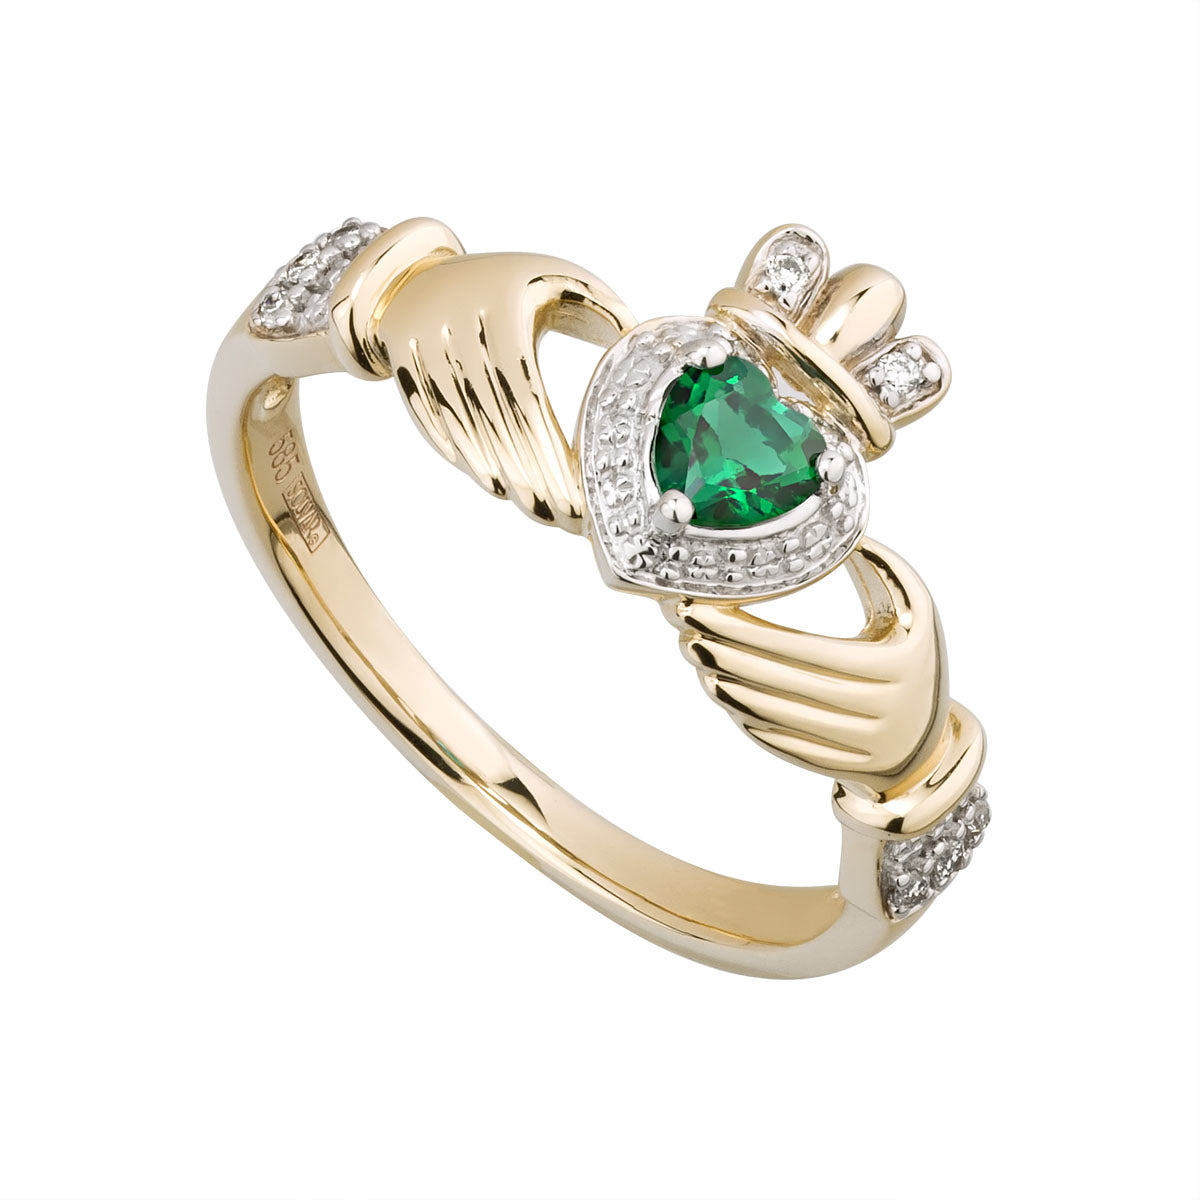 ladies 14k gold diamond and emerald claddagh ring s21030 from Solvar